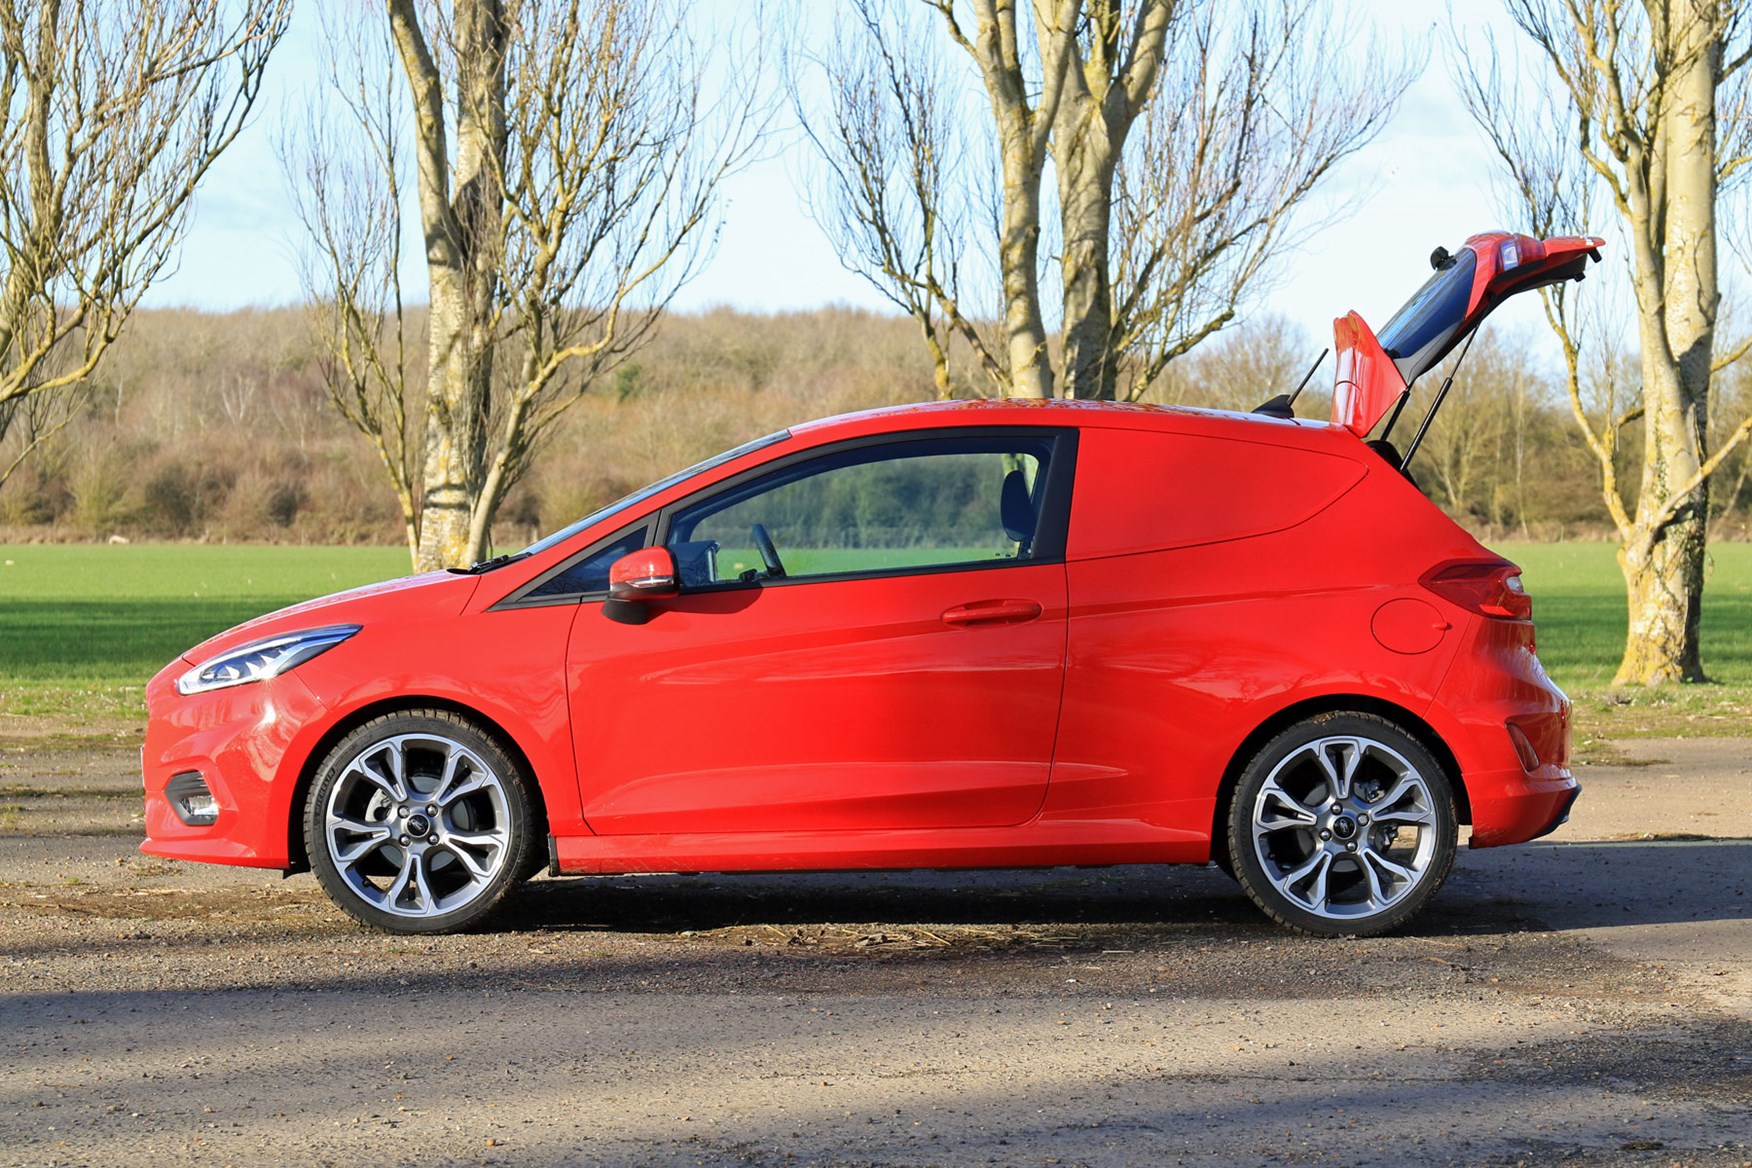 Ford Fiesta Sport Van dimensions - side view with tailgate open, red